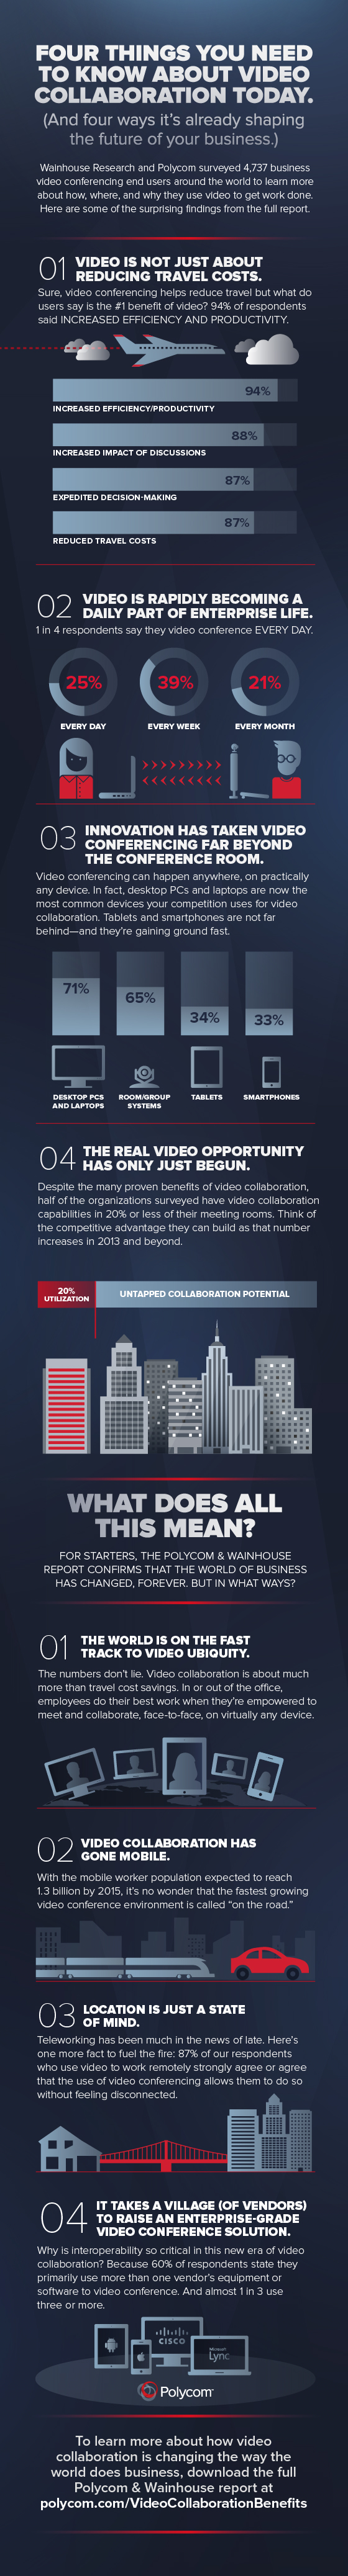 Four Things You Need to Know About Video Collaboration Today